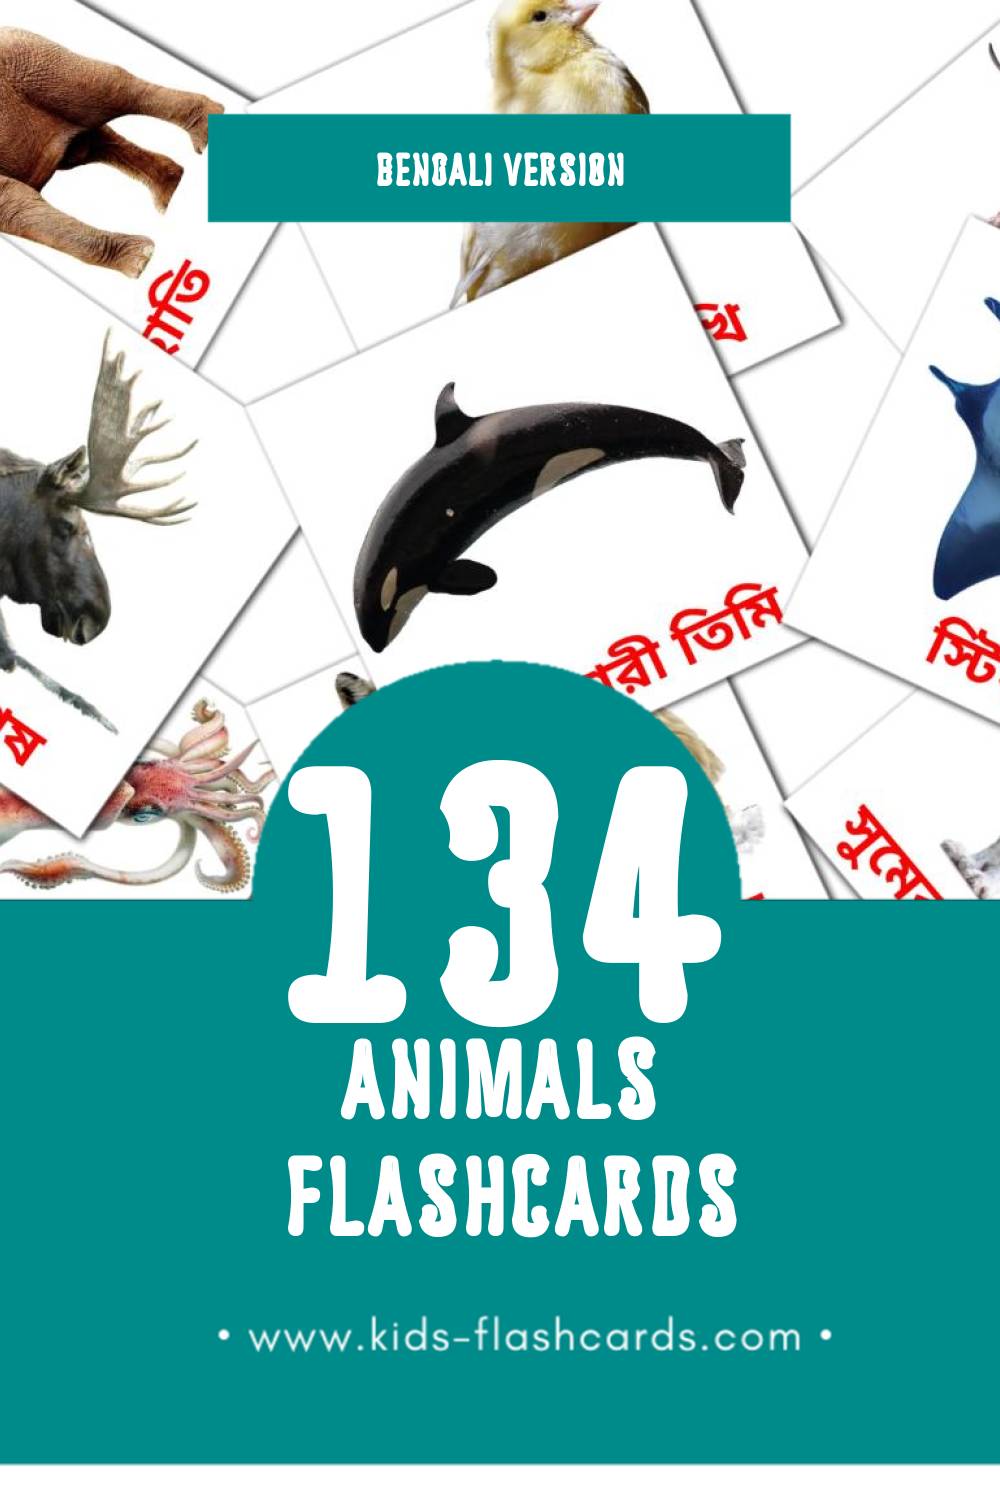 Visual পশু Flashcards for Toddlers (134 cards in Bengali)